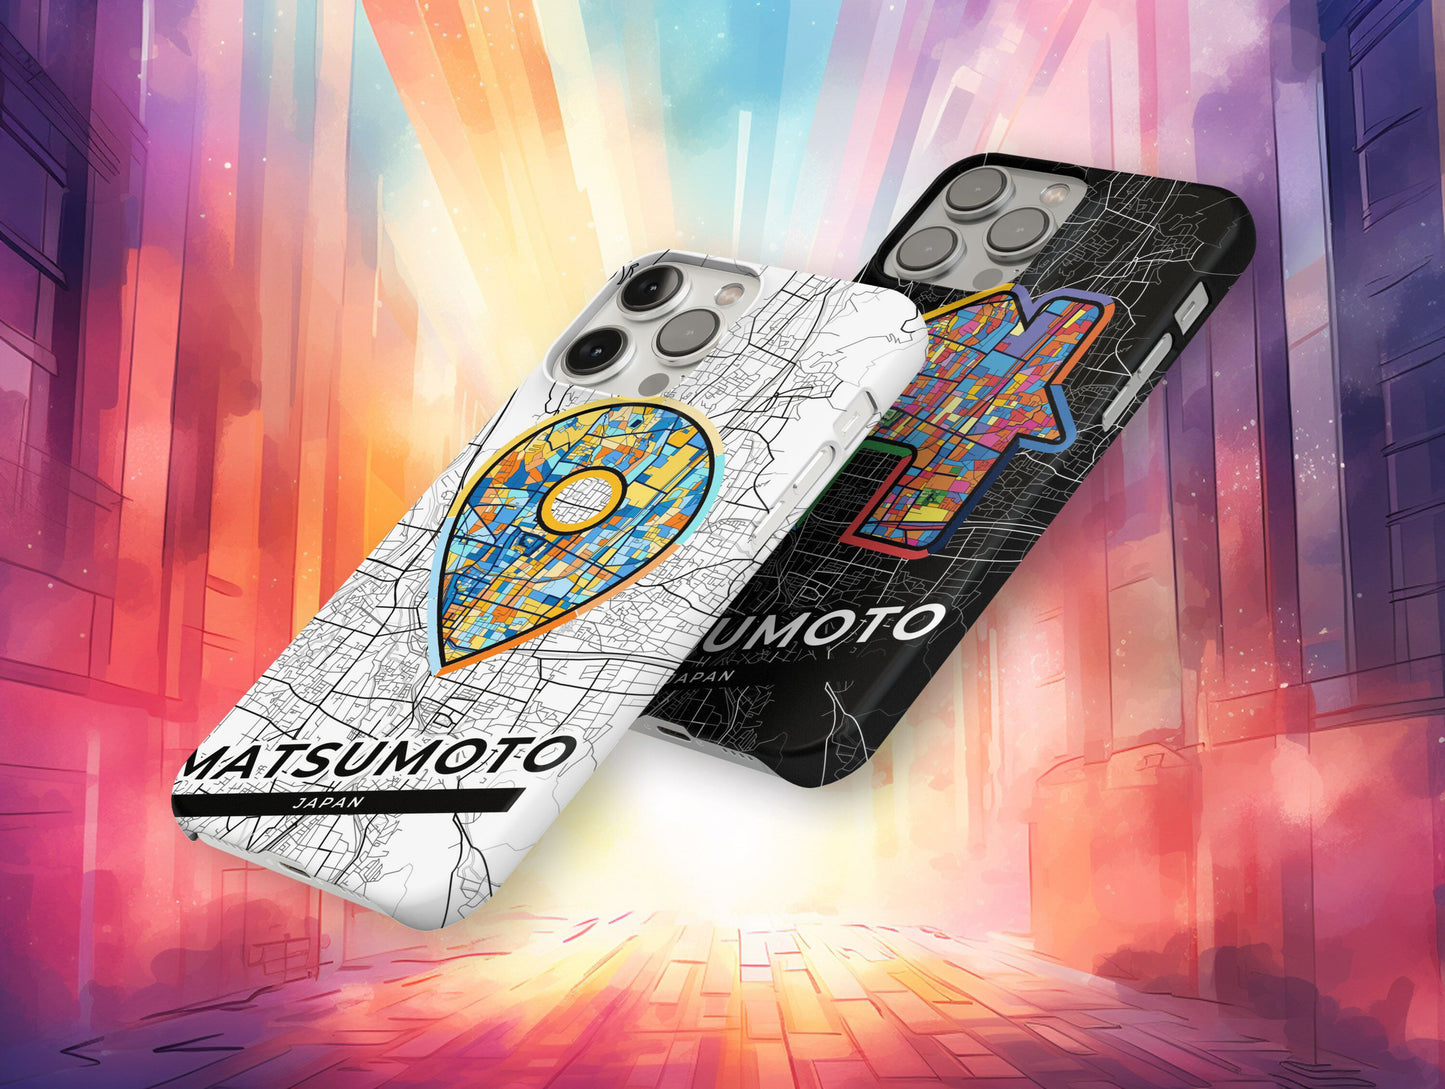 Matsumoto Japan slim phone case with colorful icon. Birthday, wedding or housewarming gift. Couple match cases.